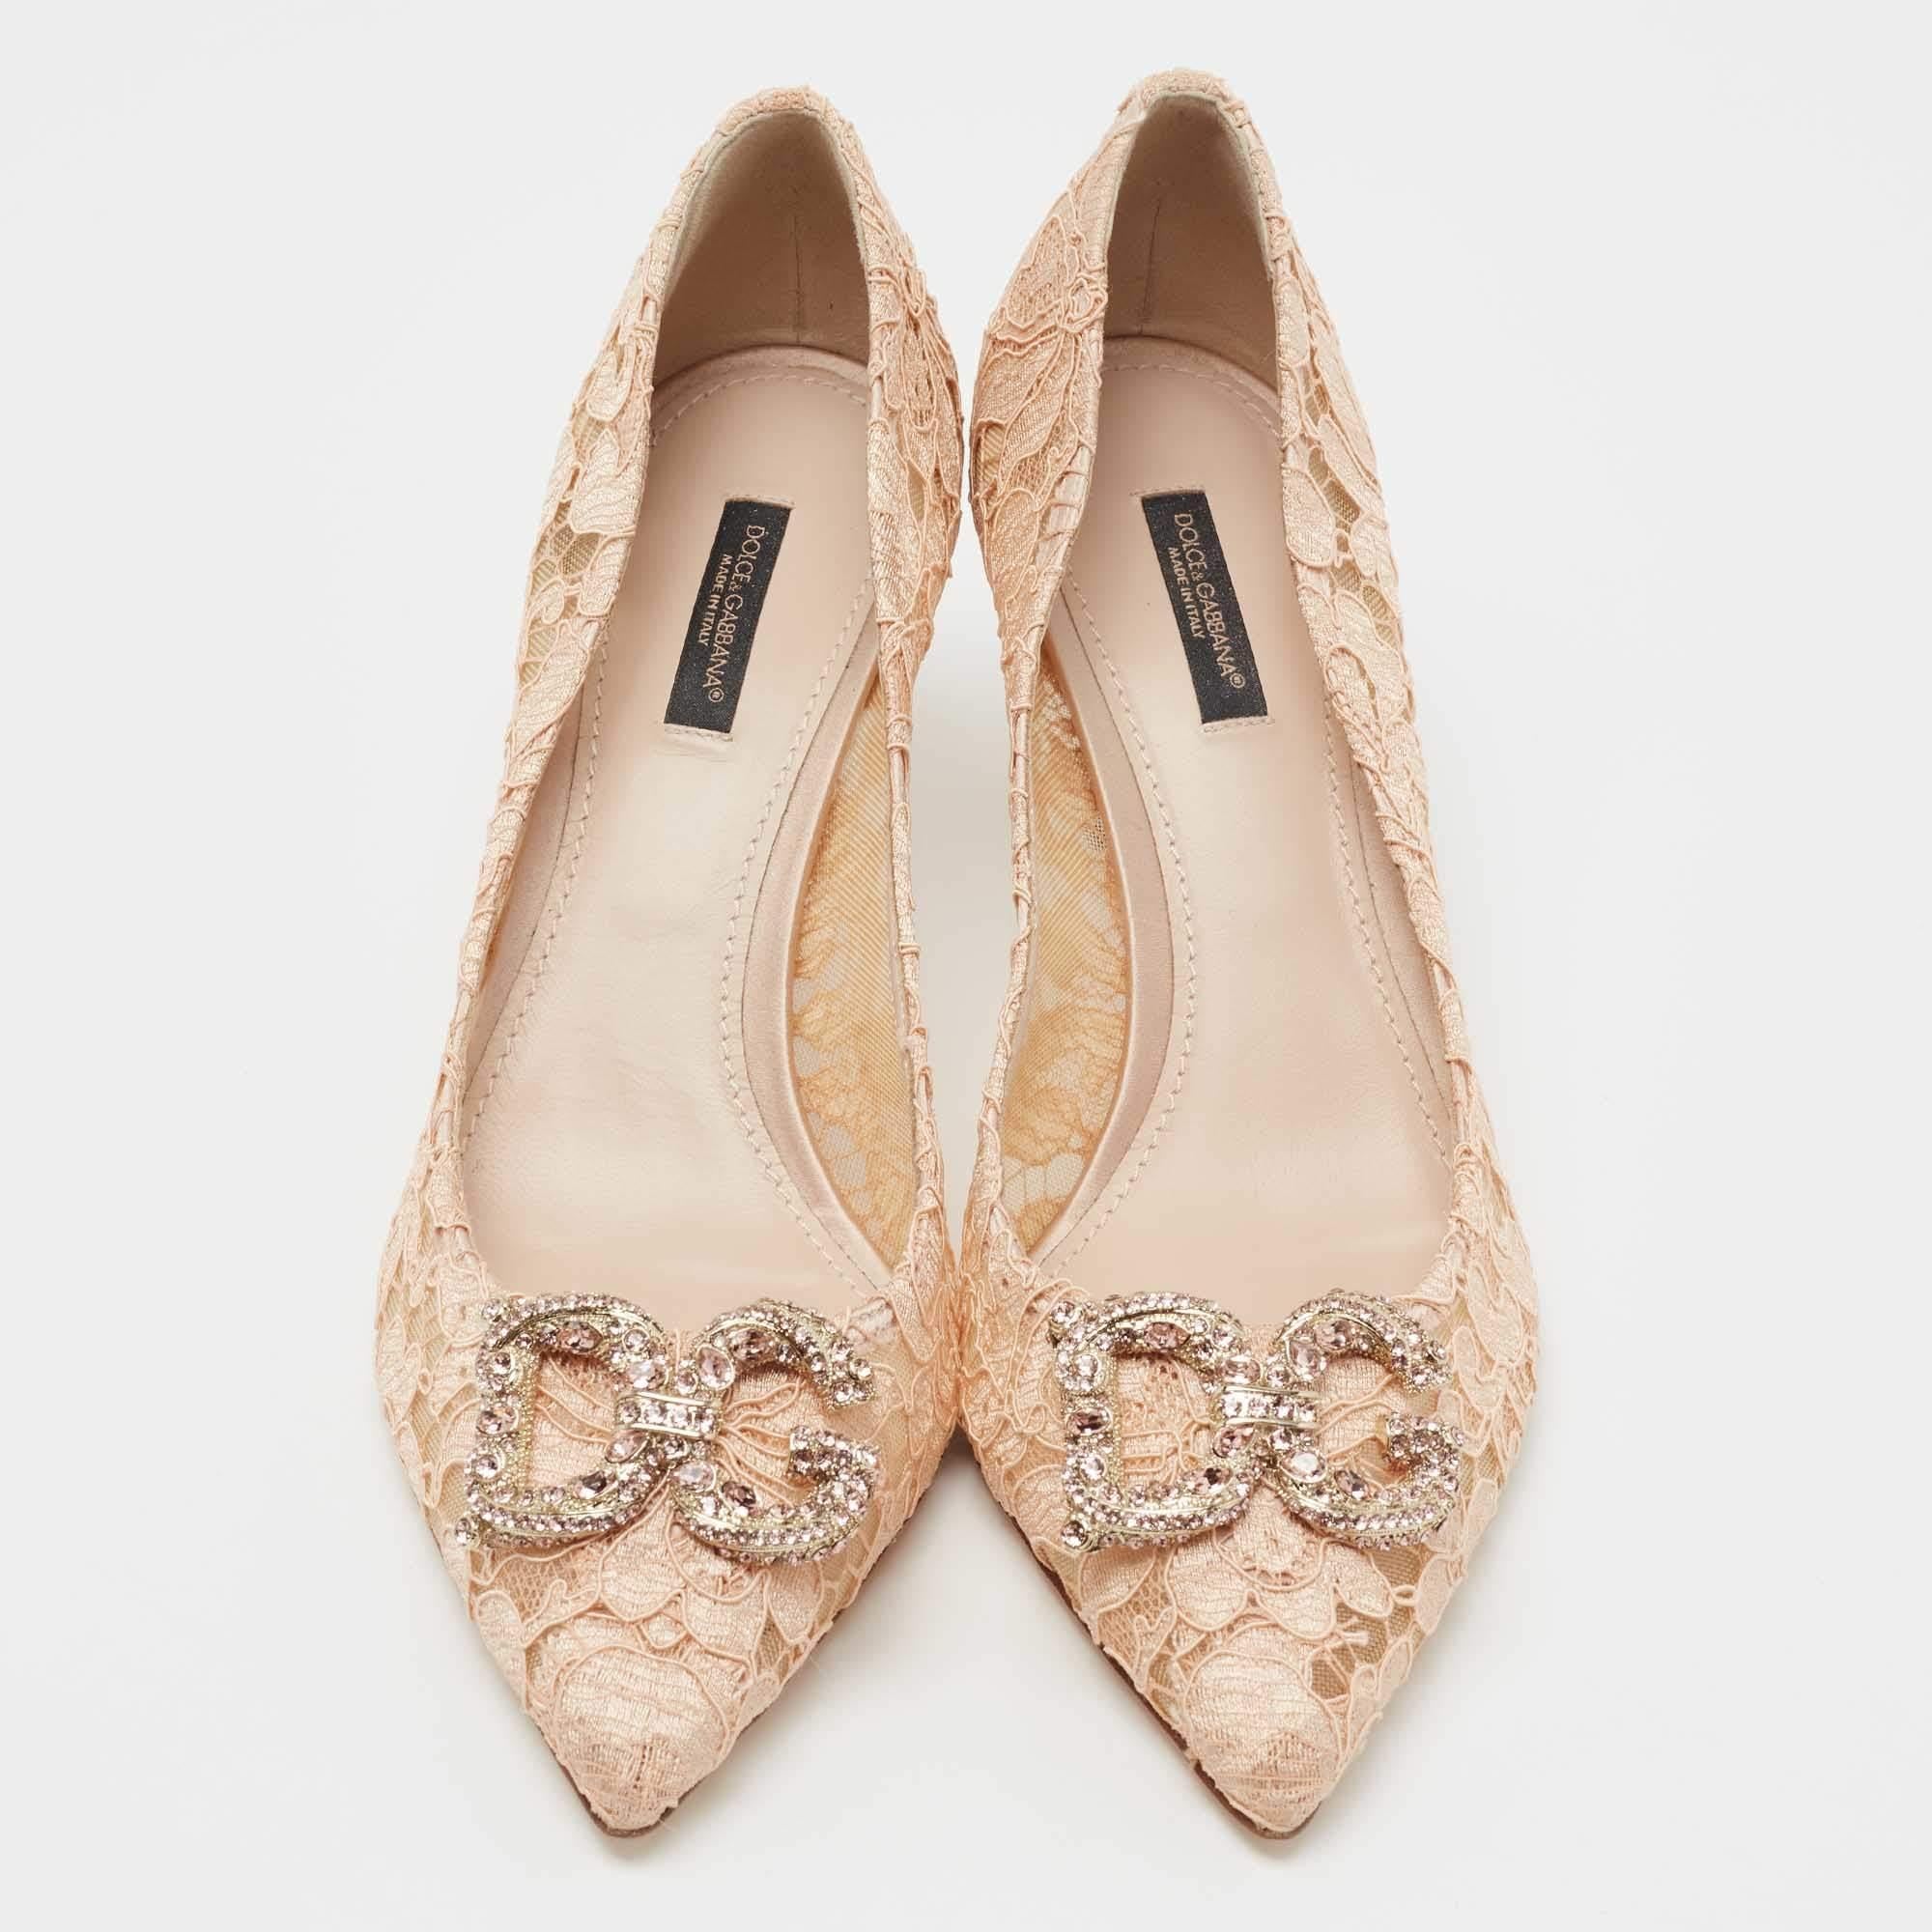 The alluring design and grand hue of these Dolce & Gabbana pumps make the pair a must-have. Crafted skilfully, these pumps are set on a durable base and comfortable heel. Choose this finely-designed pair of pumps to make a luxe fashion